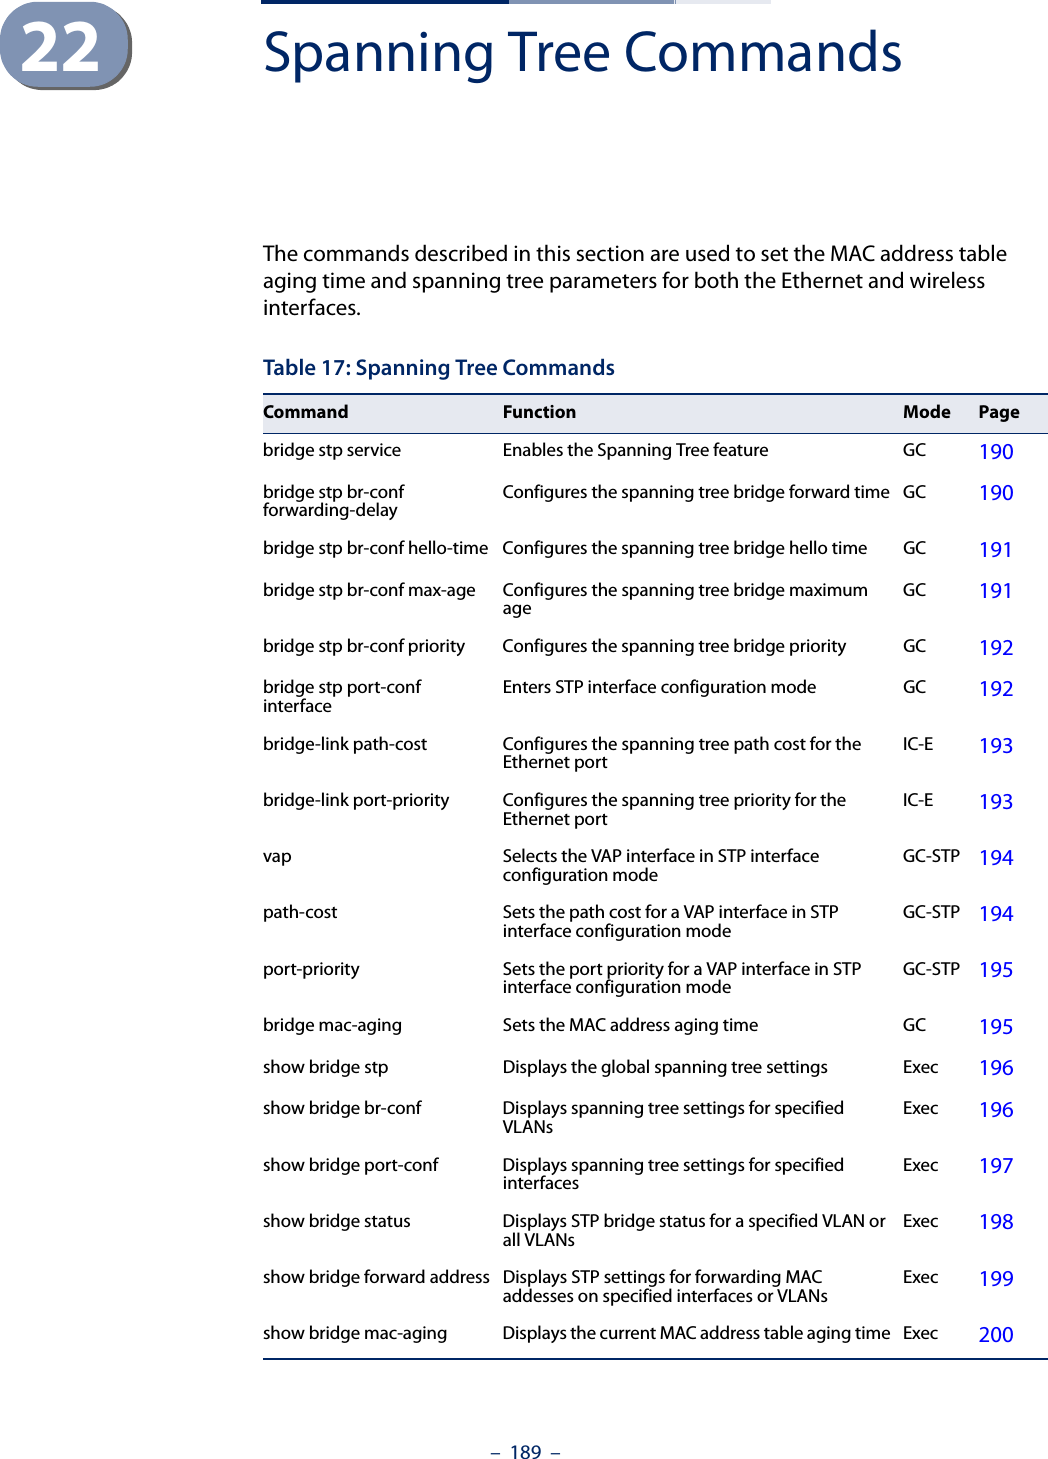 –  189  –22 Spanning Tree CommandsThe commands described in this section are used to set the MAC address table aging time and spanning tree parameters for both the Ethernet and wireless interfaces. Table 17: Spanning Tree CommandsCommand Function Mode Pagebridge stp service Enables the Spanning Tree feature GC 190bridge stp br-conf forwarding-delay Configures the spanning tree bridge forward time GC 190bridge stp br-conf hello-time Configures the spanning tree bridge hello time GC 191bridge stp br-conf max-age Configures the spanning tree bridge maximum age GC 191bridge stp br-conf priority Configures the spanning tree bridge priority GC 192bridge stp port-conf interface Enters STP interface configuration mode GC 192bridge-link path-cost Configures the spanning tree path cost for the Ethernet port IC-E 193bridge-link port-priority Configures the spanning tree priority for the Ethernet port IC-E 193vap Selects the VAP interface in STP interface configuration mode GC-STP 194path-cost Sets the path cost for a VAP interface in STP interface configuration mode GC-STP 194port-priority Sets the port priority for a VAP interface in STP interface configuration mode GC-STP 195bridge mac-aging Sets the MAC address aging time GC 195show bridge stp Displays the global spanning tree settings Exec 196show bridge br-conf Displays spanning tree settings for specified VLANs Exec 196show bridge port-conf Displays spanning tree settings for specified interfaces Exec 197show bridge status Displays STP bridge status for a specified VLAN or all VLANs Exec 198show bridge forward address Displays STP settings for forwarding MAC addesses on specified interfaces or VLANs Exec 199show bridge mac-aging Displays the current MAC address table aging time Exec 200